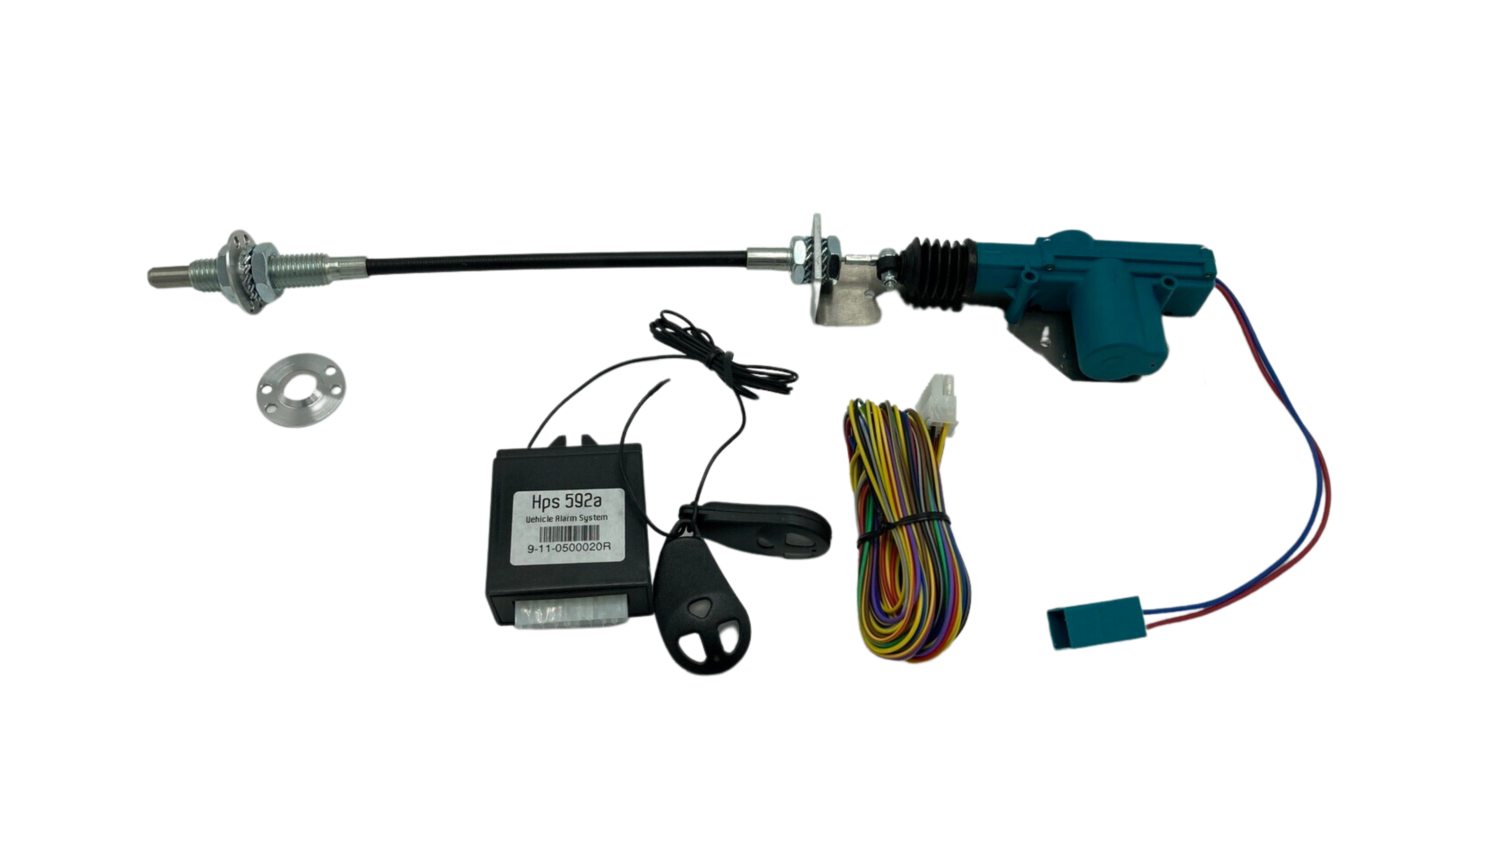 Set Penlock 12V 270MM with extra remote control